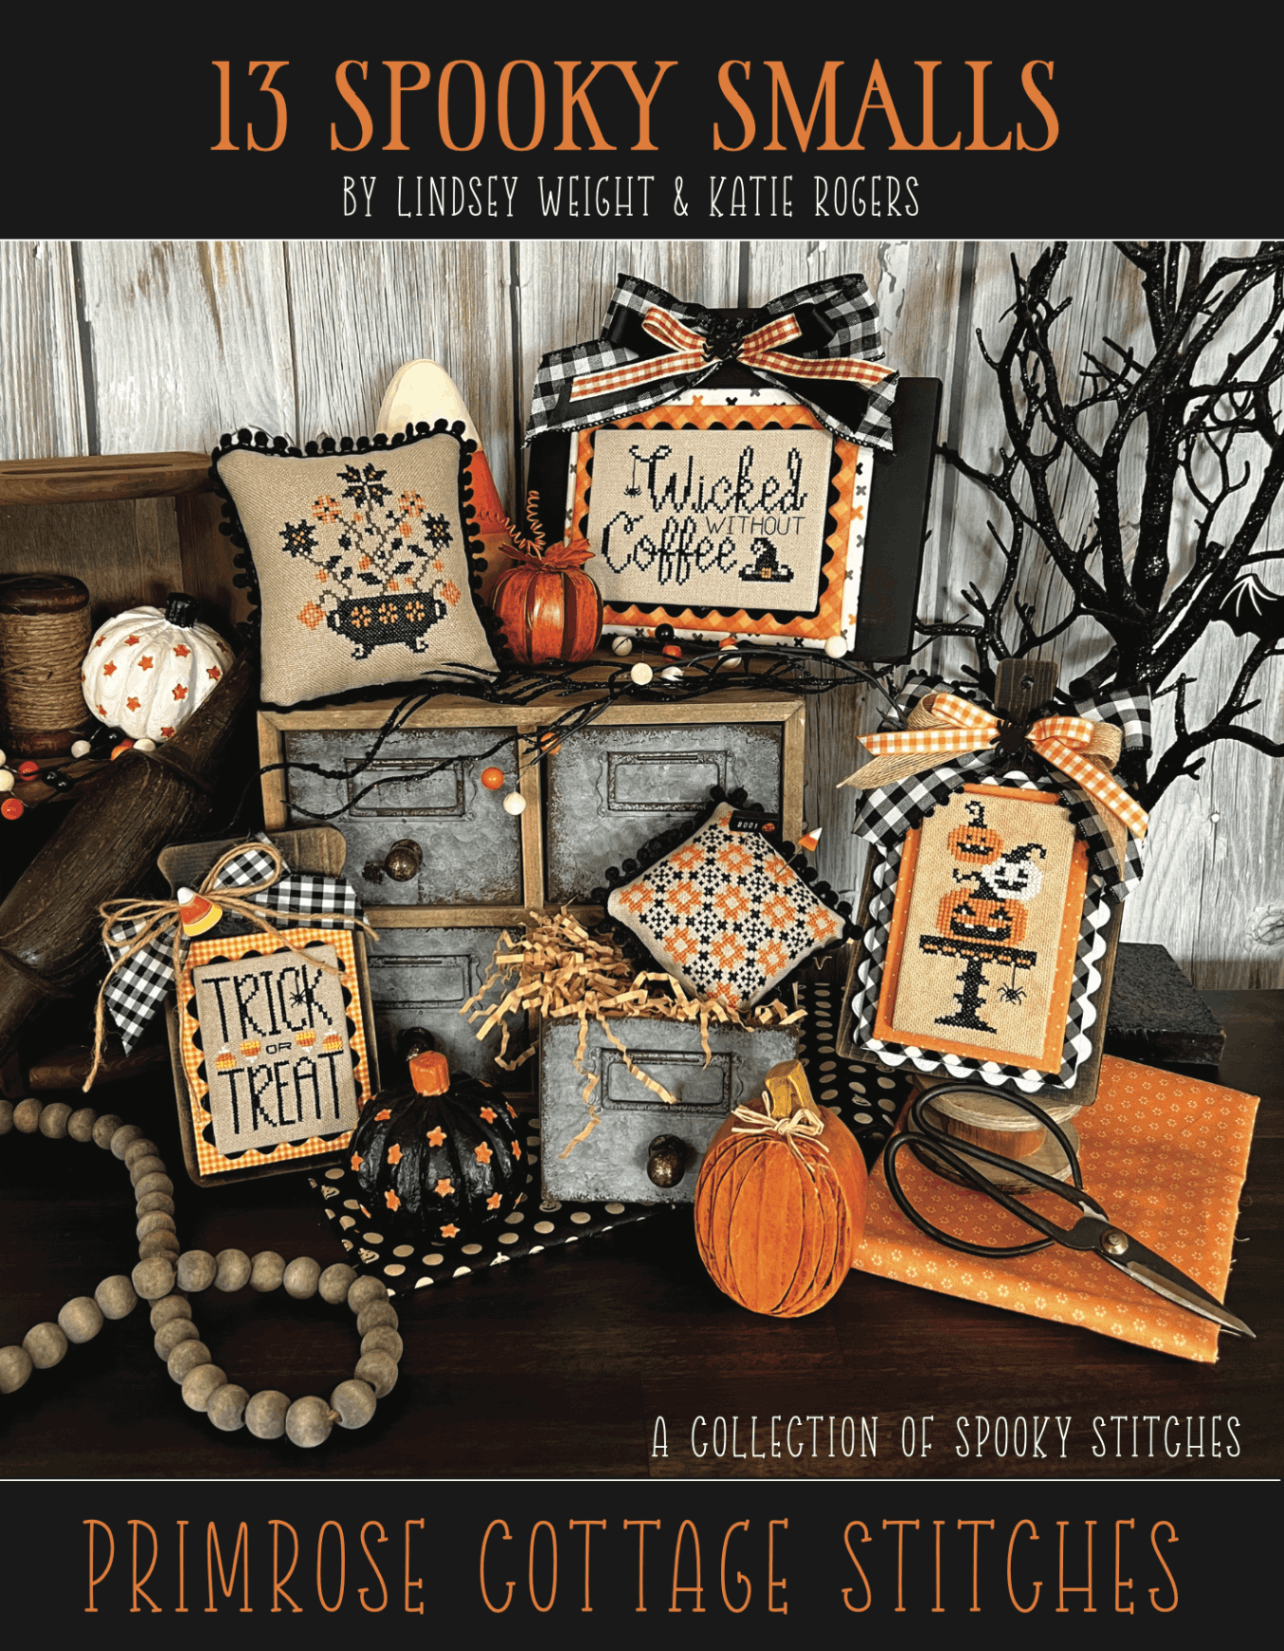 13 Spooky Smalls by Primrose Cottage Stitches